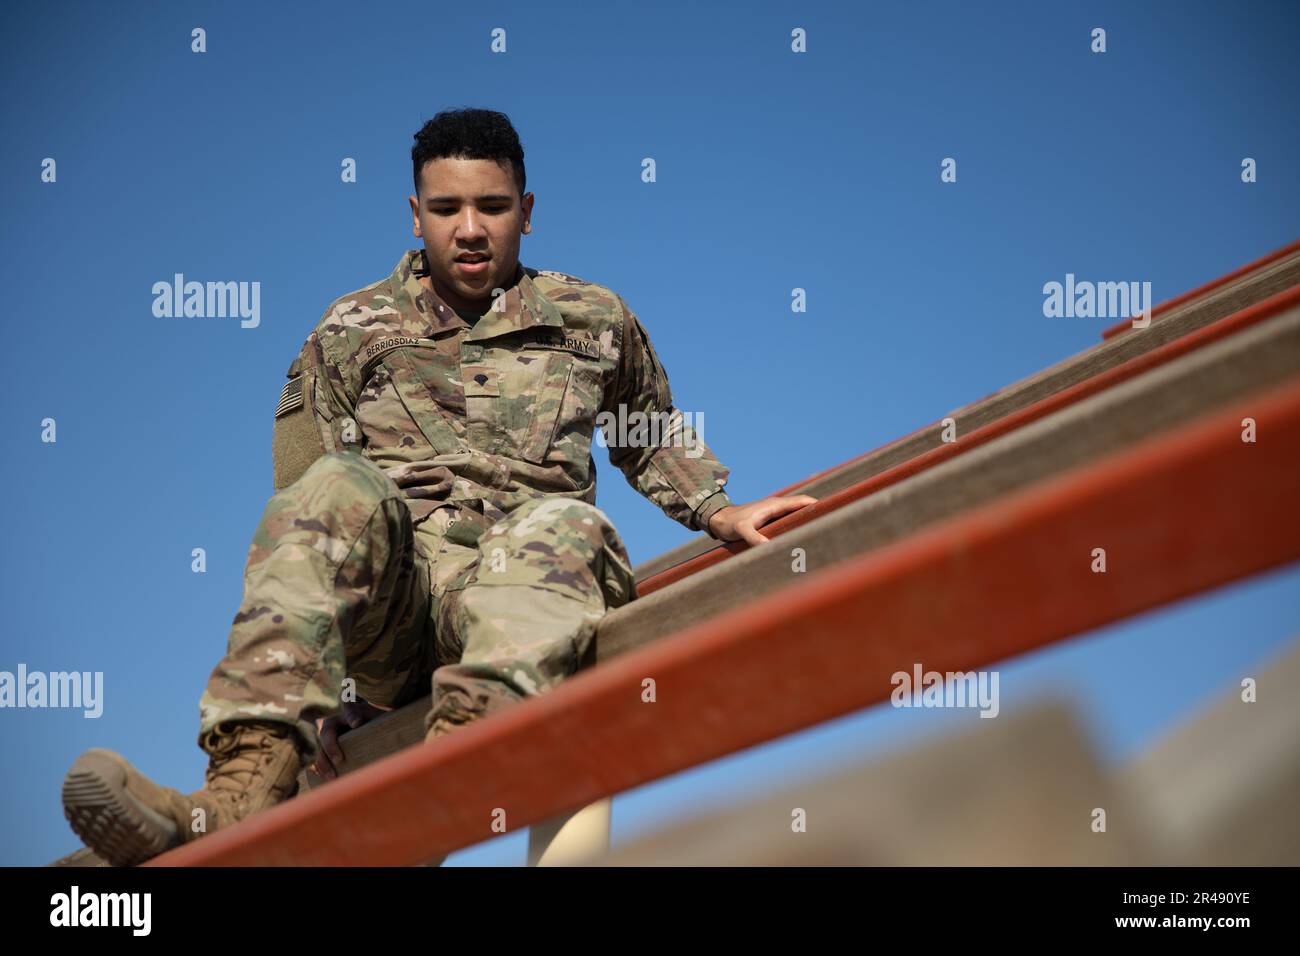 Spc. Emanuel Berrios-Rivas, a signal support systems specialist, 143rd Expeditionary Sustainment Command, completes the weaver during an air assault pre-assessment obstacle course at Camp Buehring, Kuwait Jan. 6, 2023. Soldiers were required to complete a nine-event obstacle course as a prerequisite for air assault school. Stock Photo